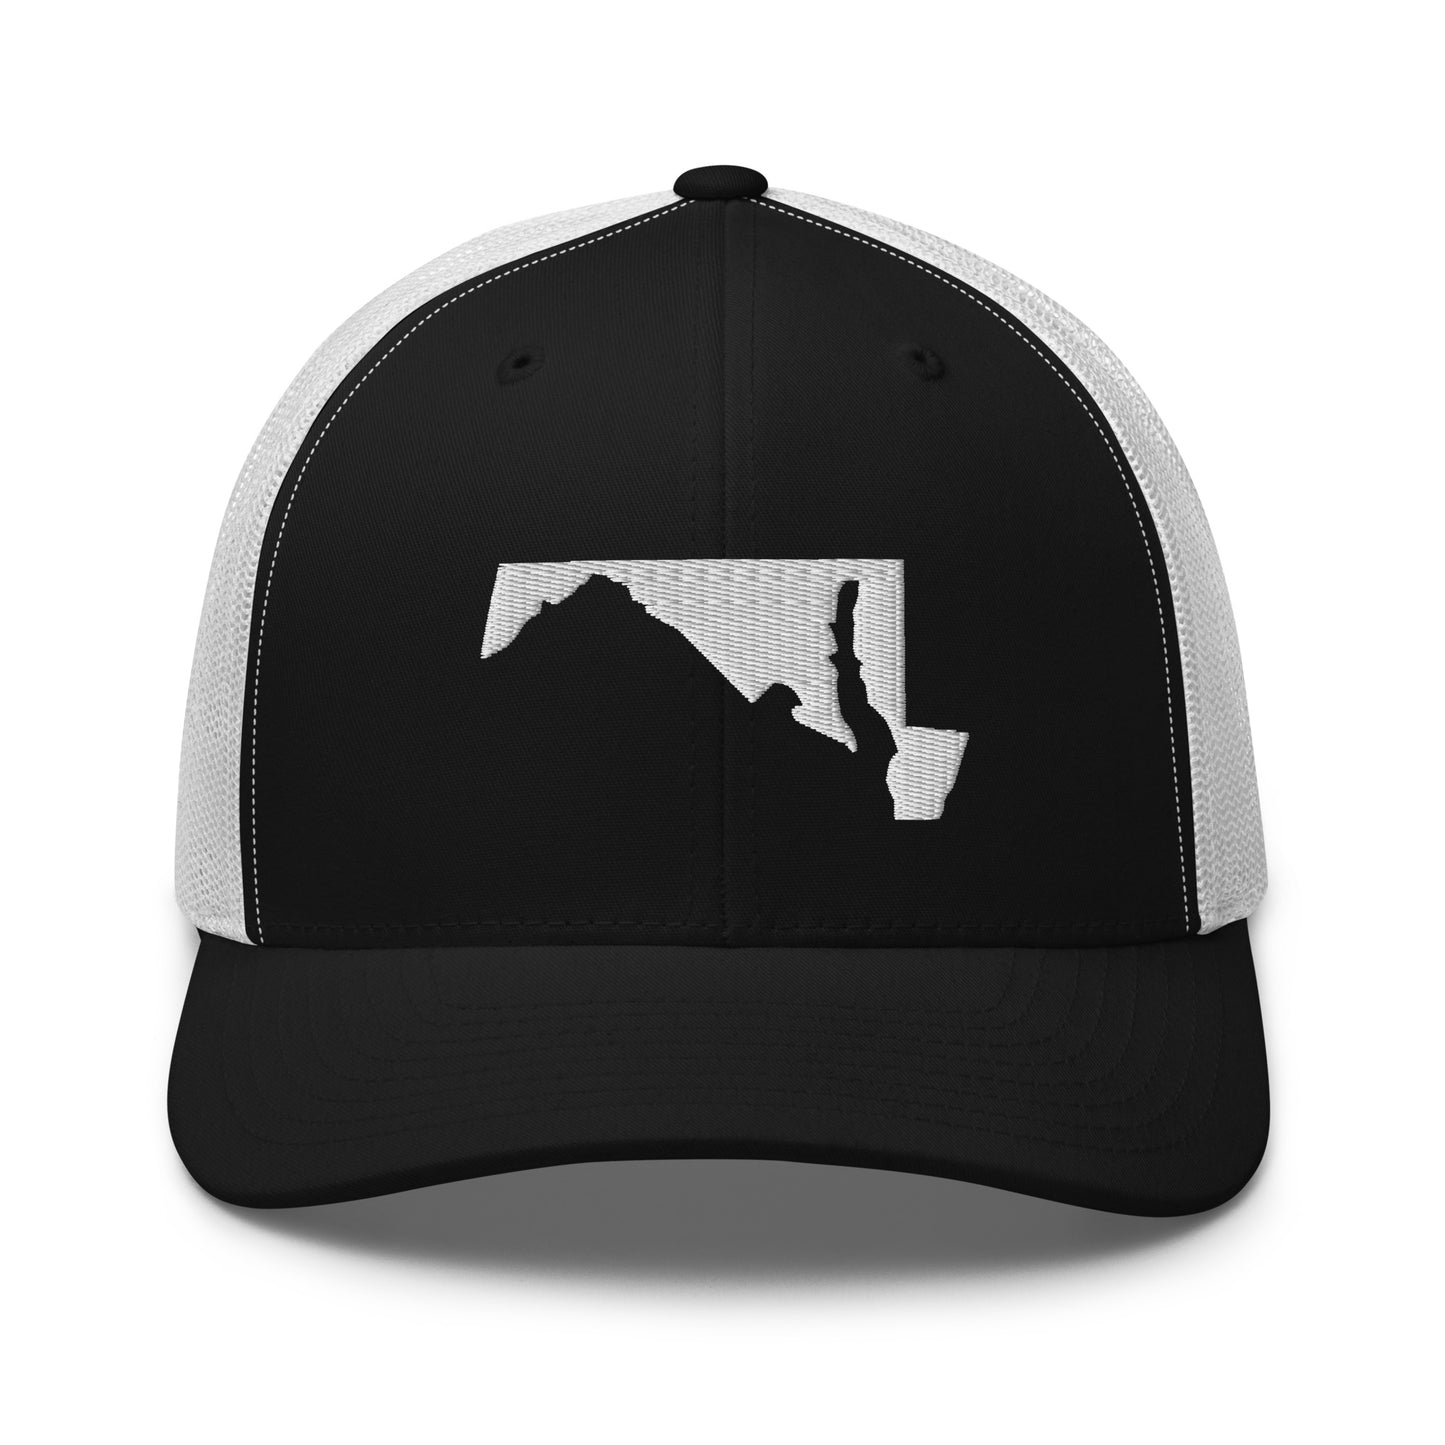 Maryland State Silhouette Mid 6 Panel Snapback Trucker Hat